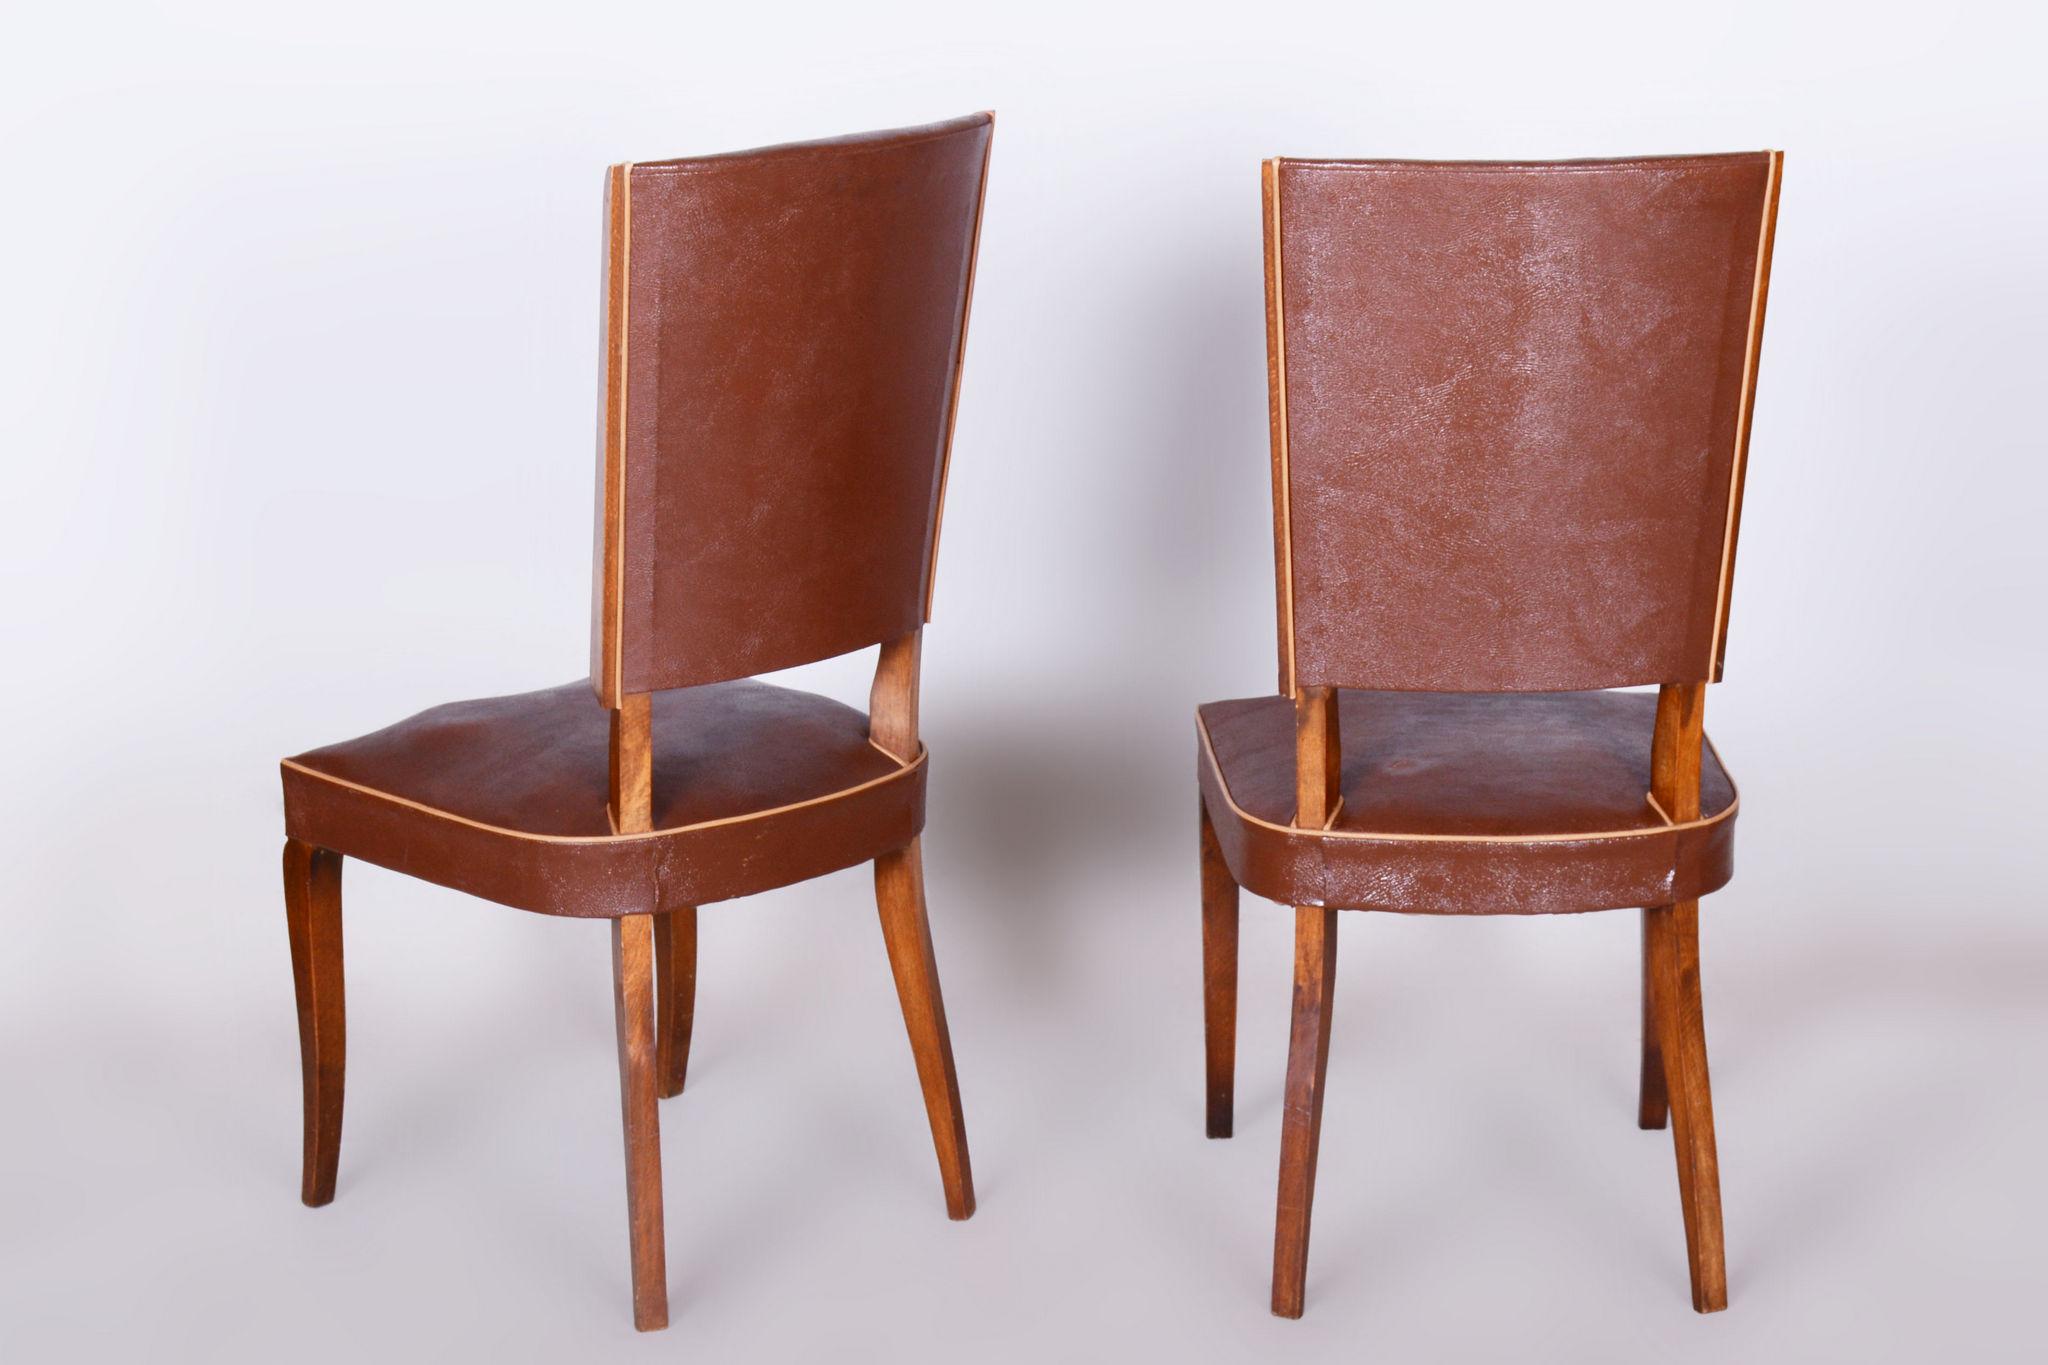 Pair of Original Art Deco Chairs, by Jules Leleu, Beech, France, 1920s For Sale 4